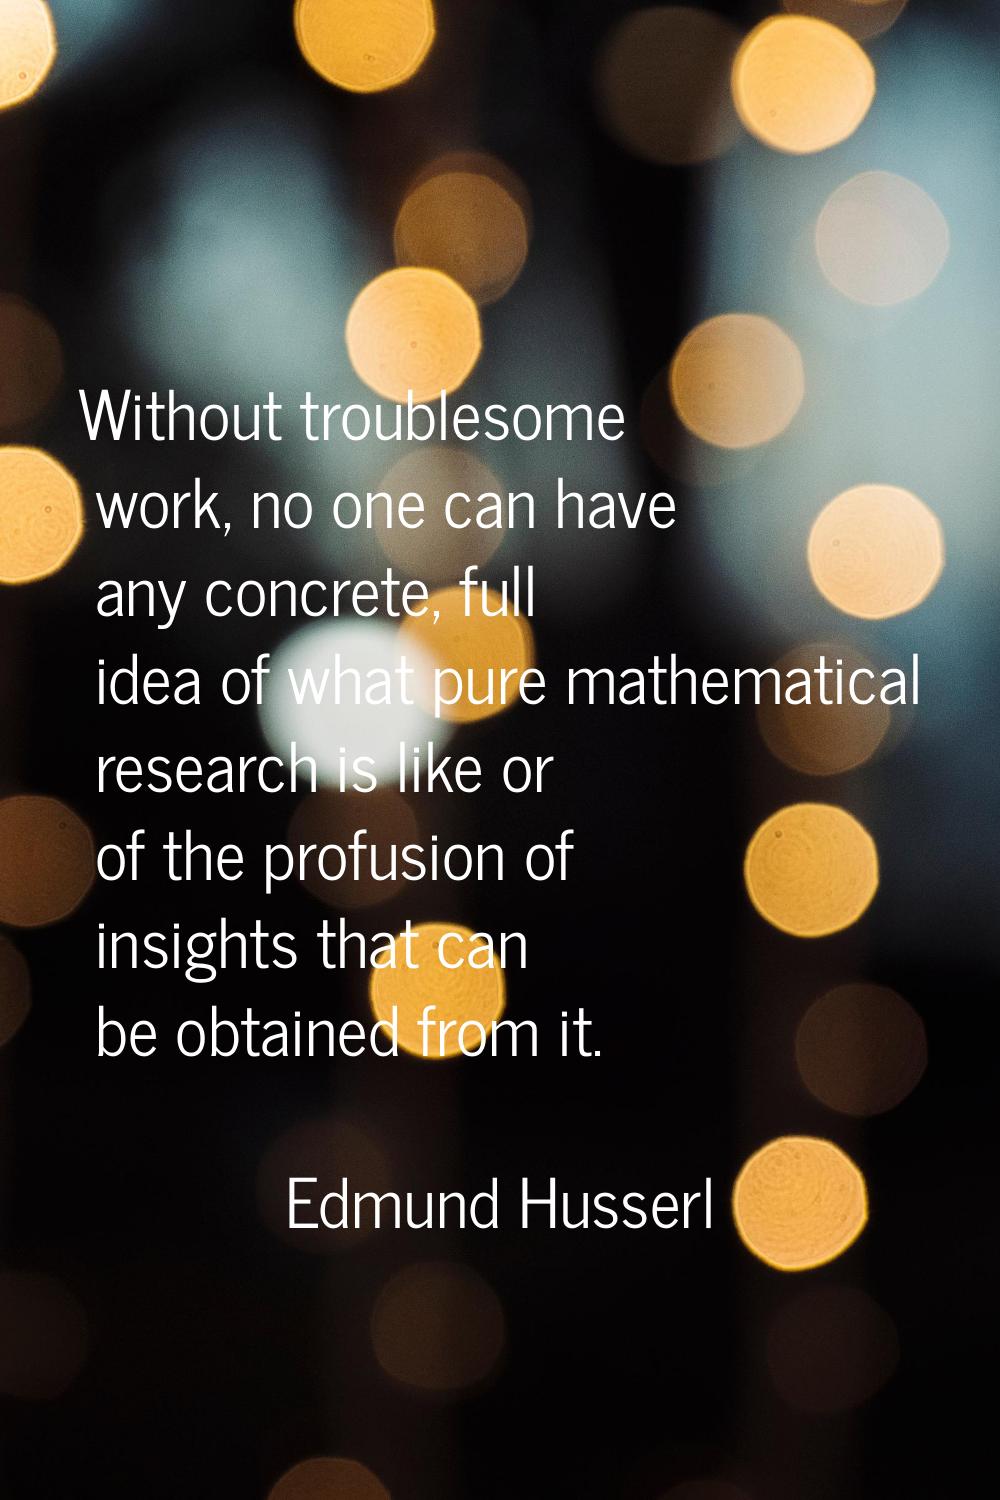 Without troublesome work, no one can have any concrete, full idea of what pure mathematical researc